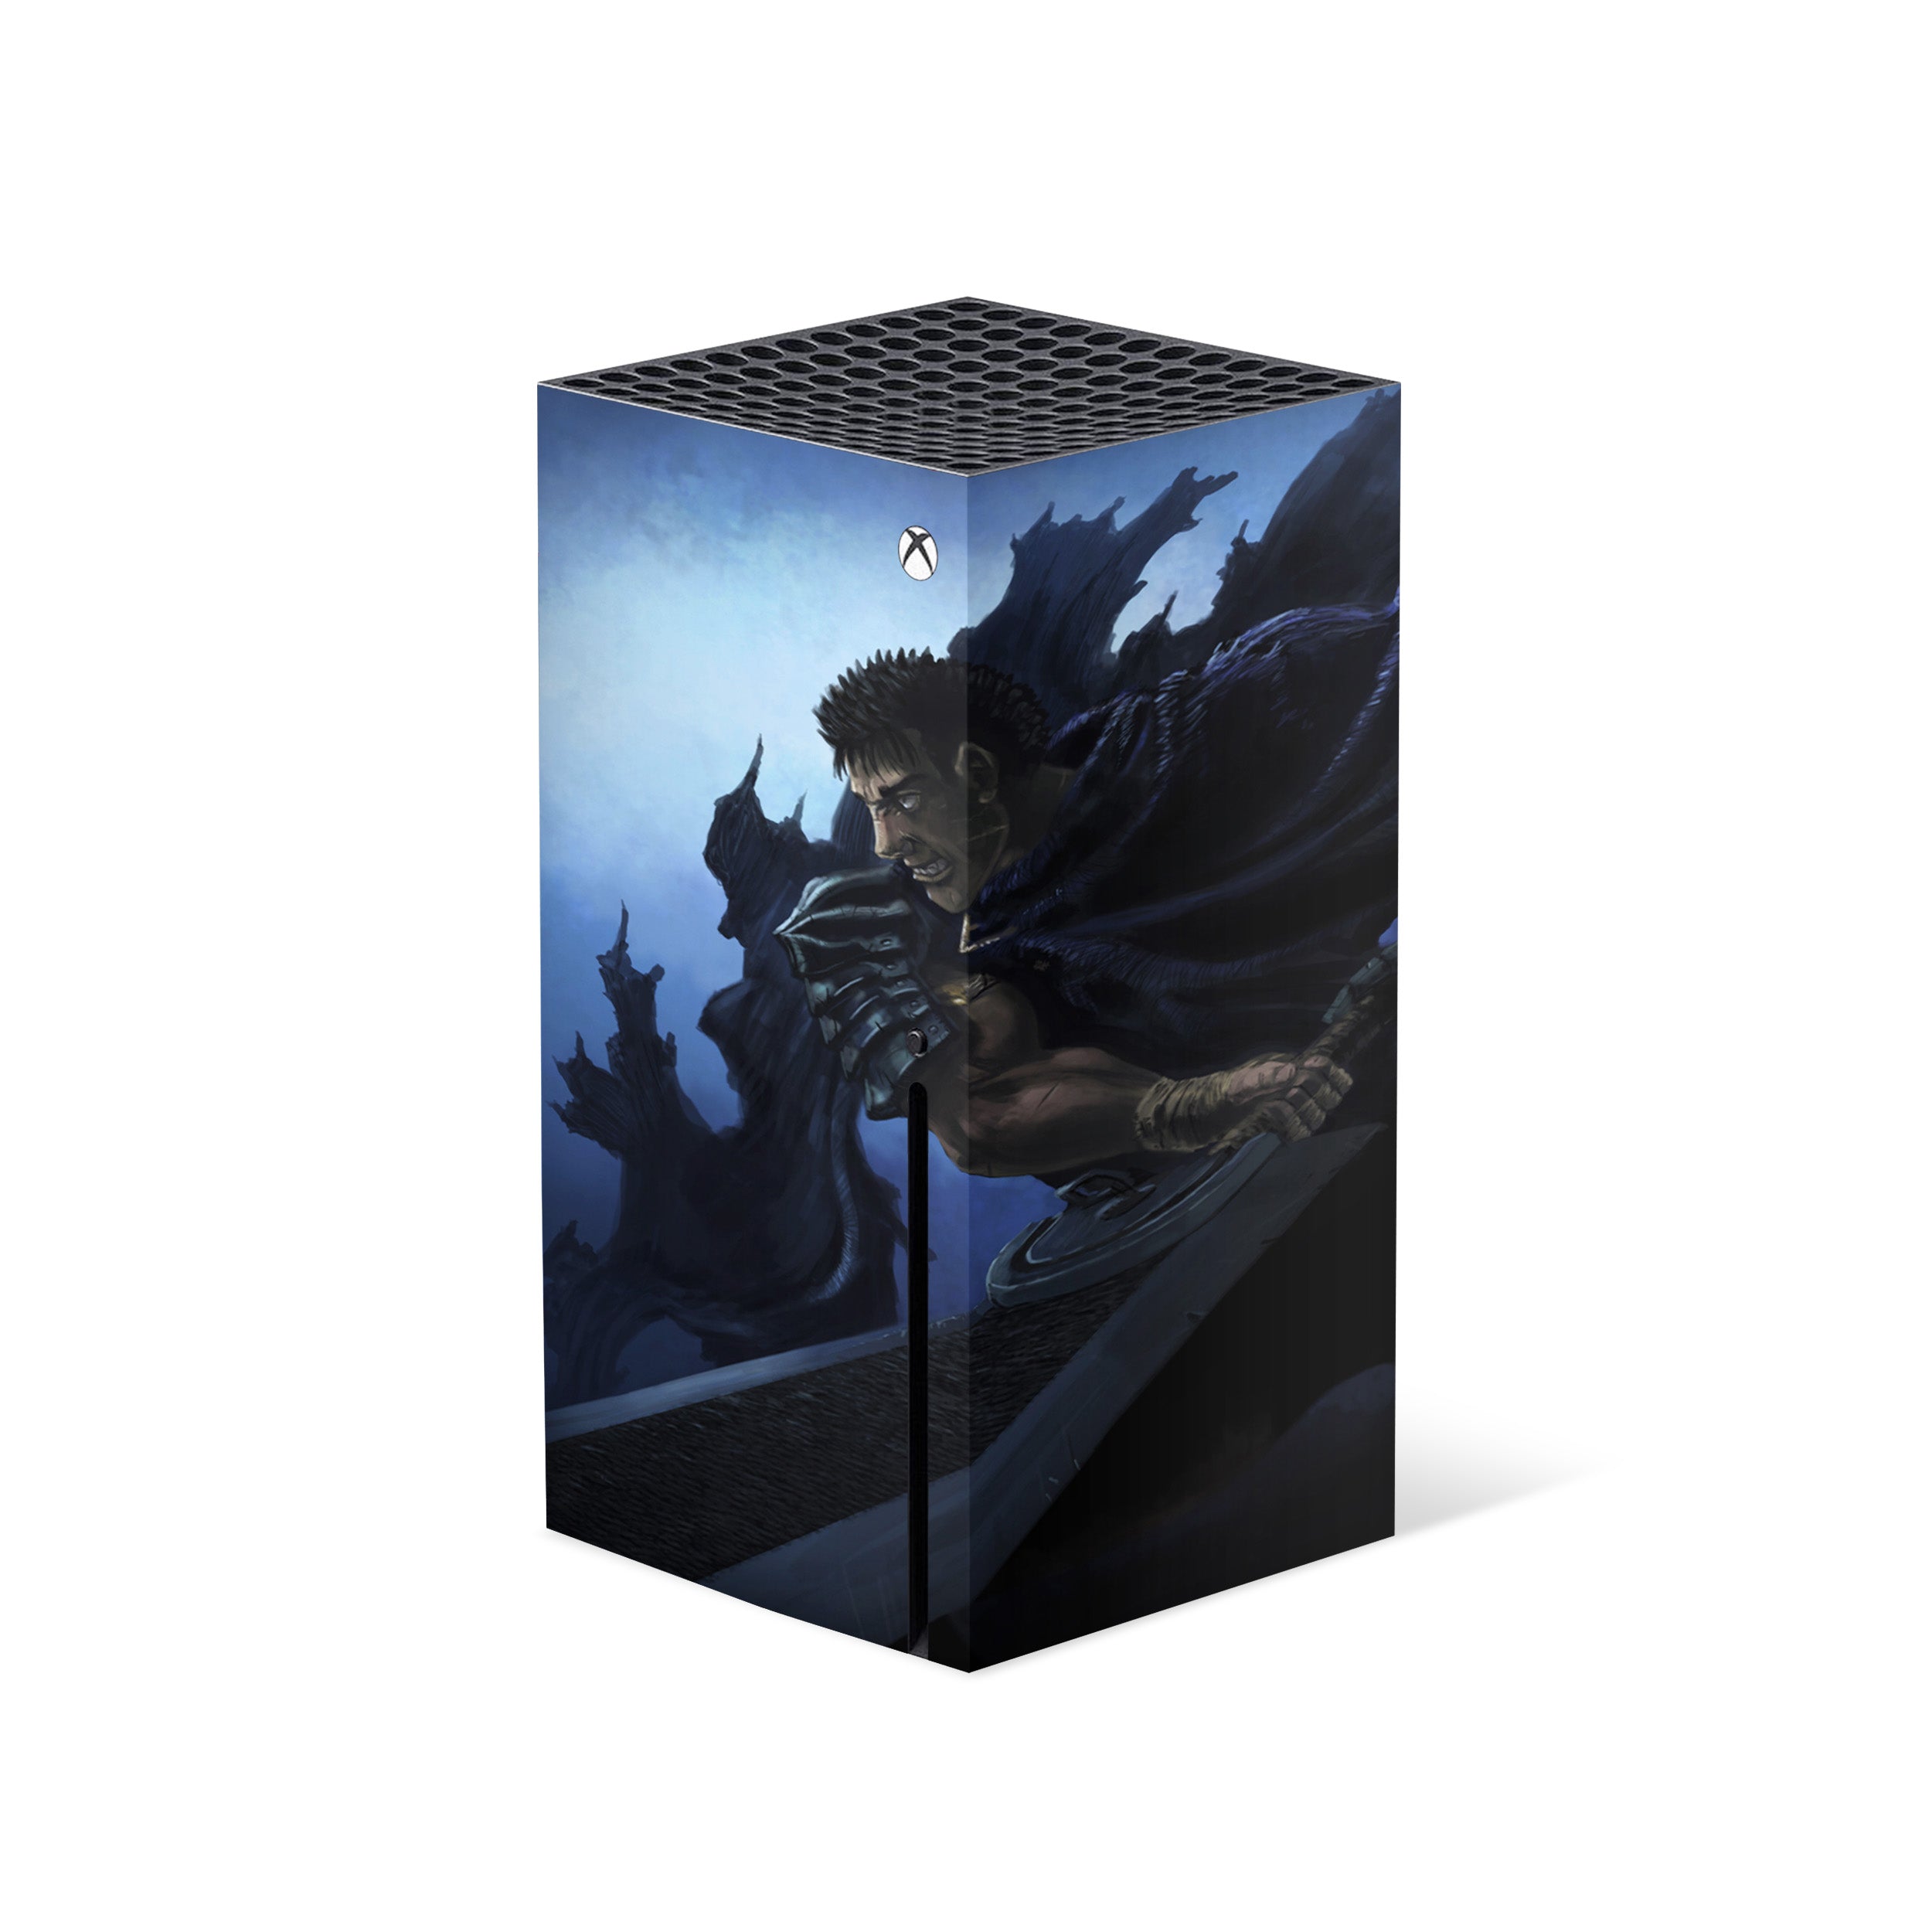 A video game skin featuring a Berserk Guts design for the Xbox Series X.